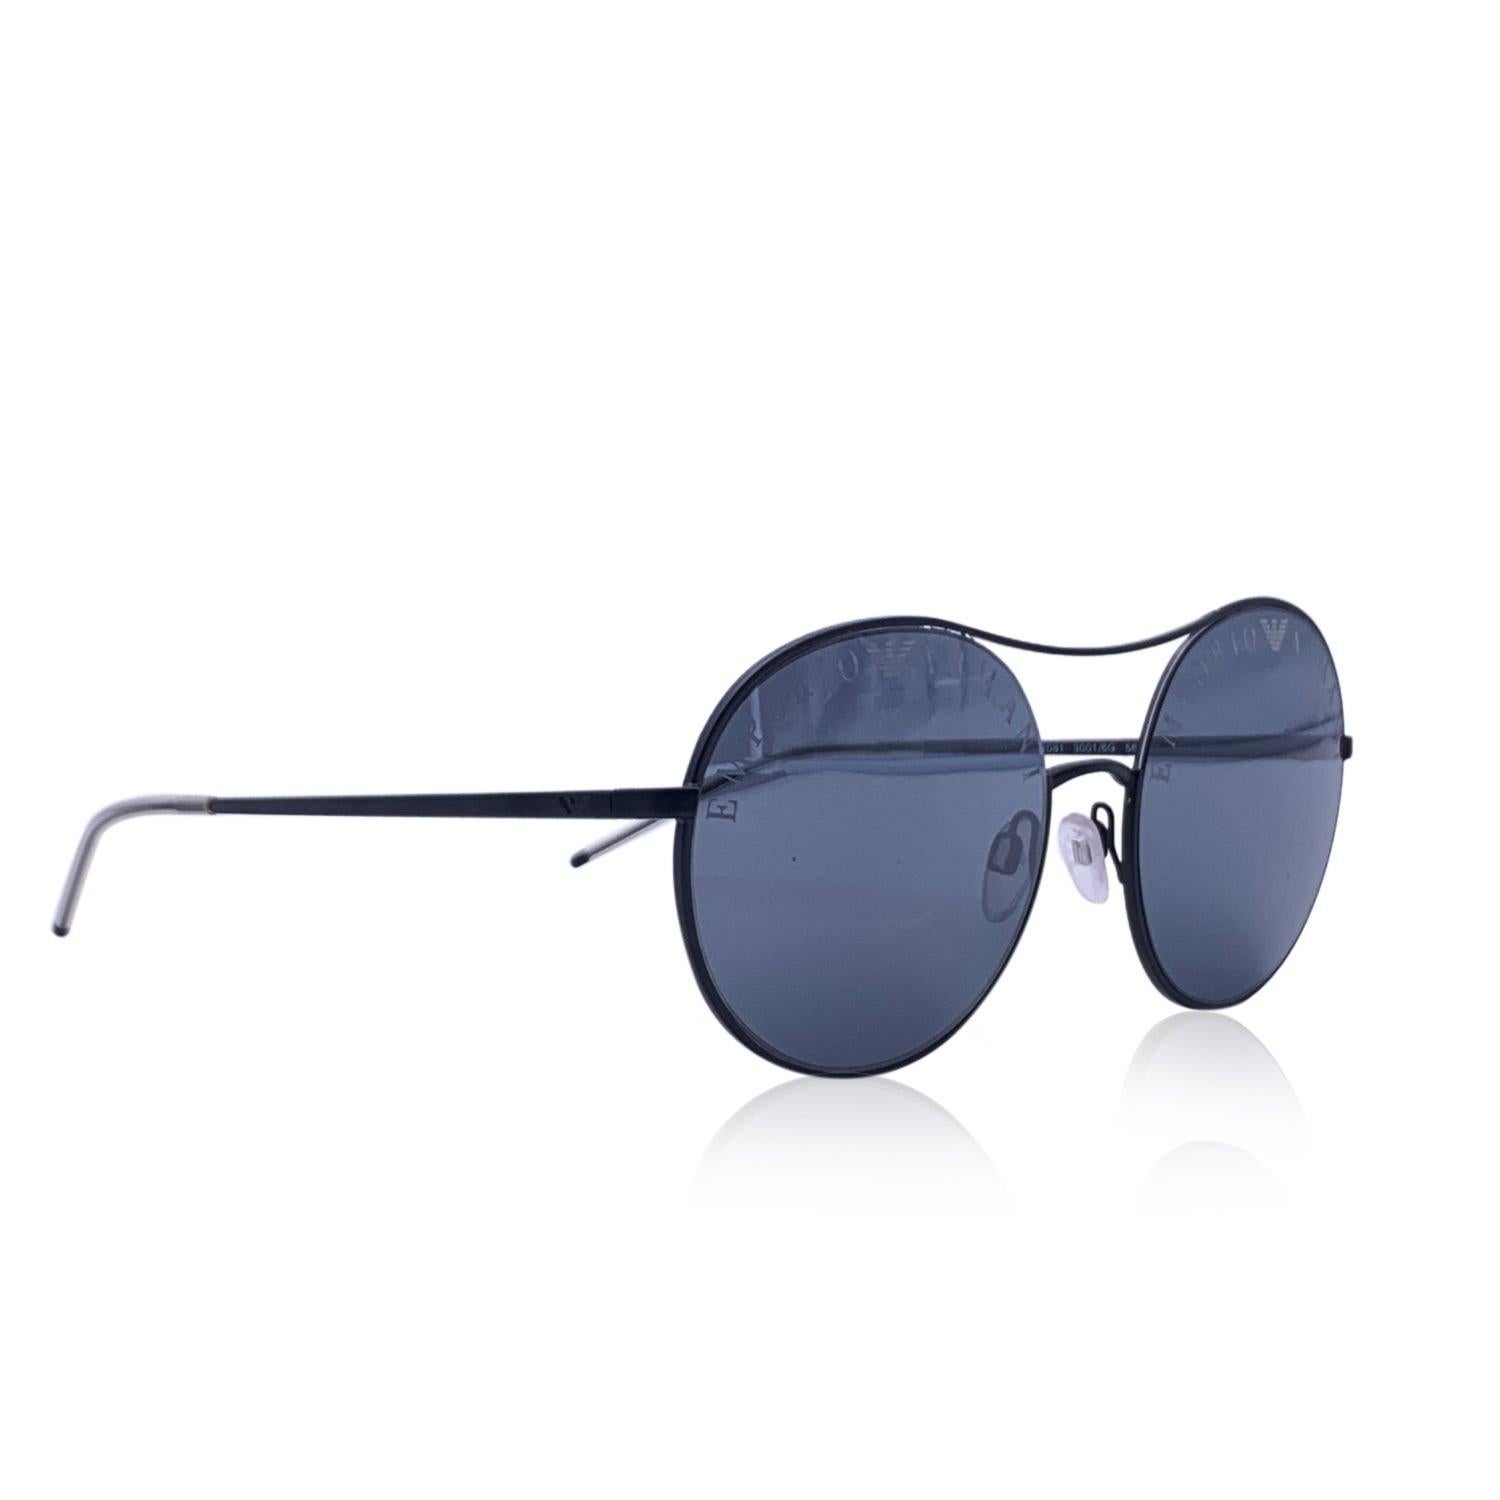 Emporio Armani Mint Women Sunglasses, Mod. EA2081 30016G56. Round shaped. Black metal frame with mirrored lenses. Made in Italy. Style and refs: 56/18-139 mm Details MATERIAL: Metal COLOR: Black MODEL: EA2081 30016G56 GENDER: Women COUNTRY OF